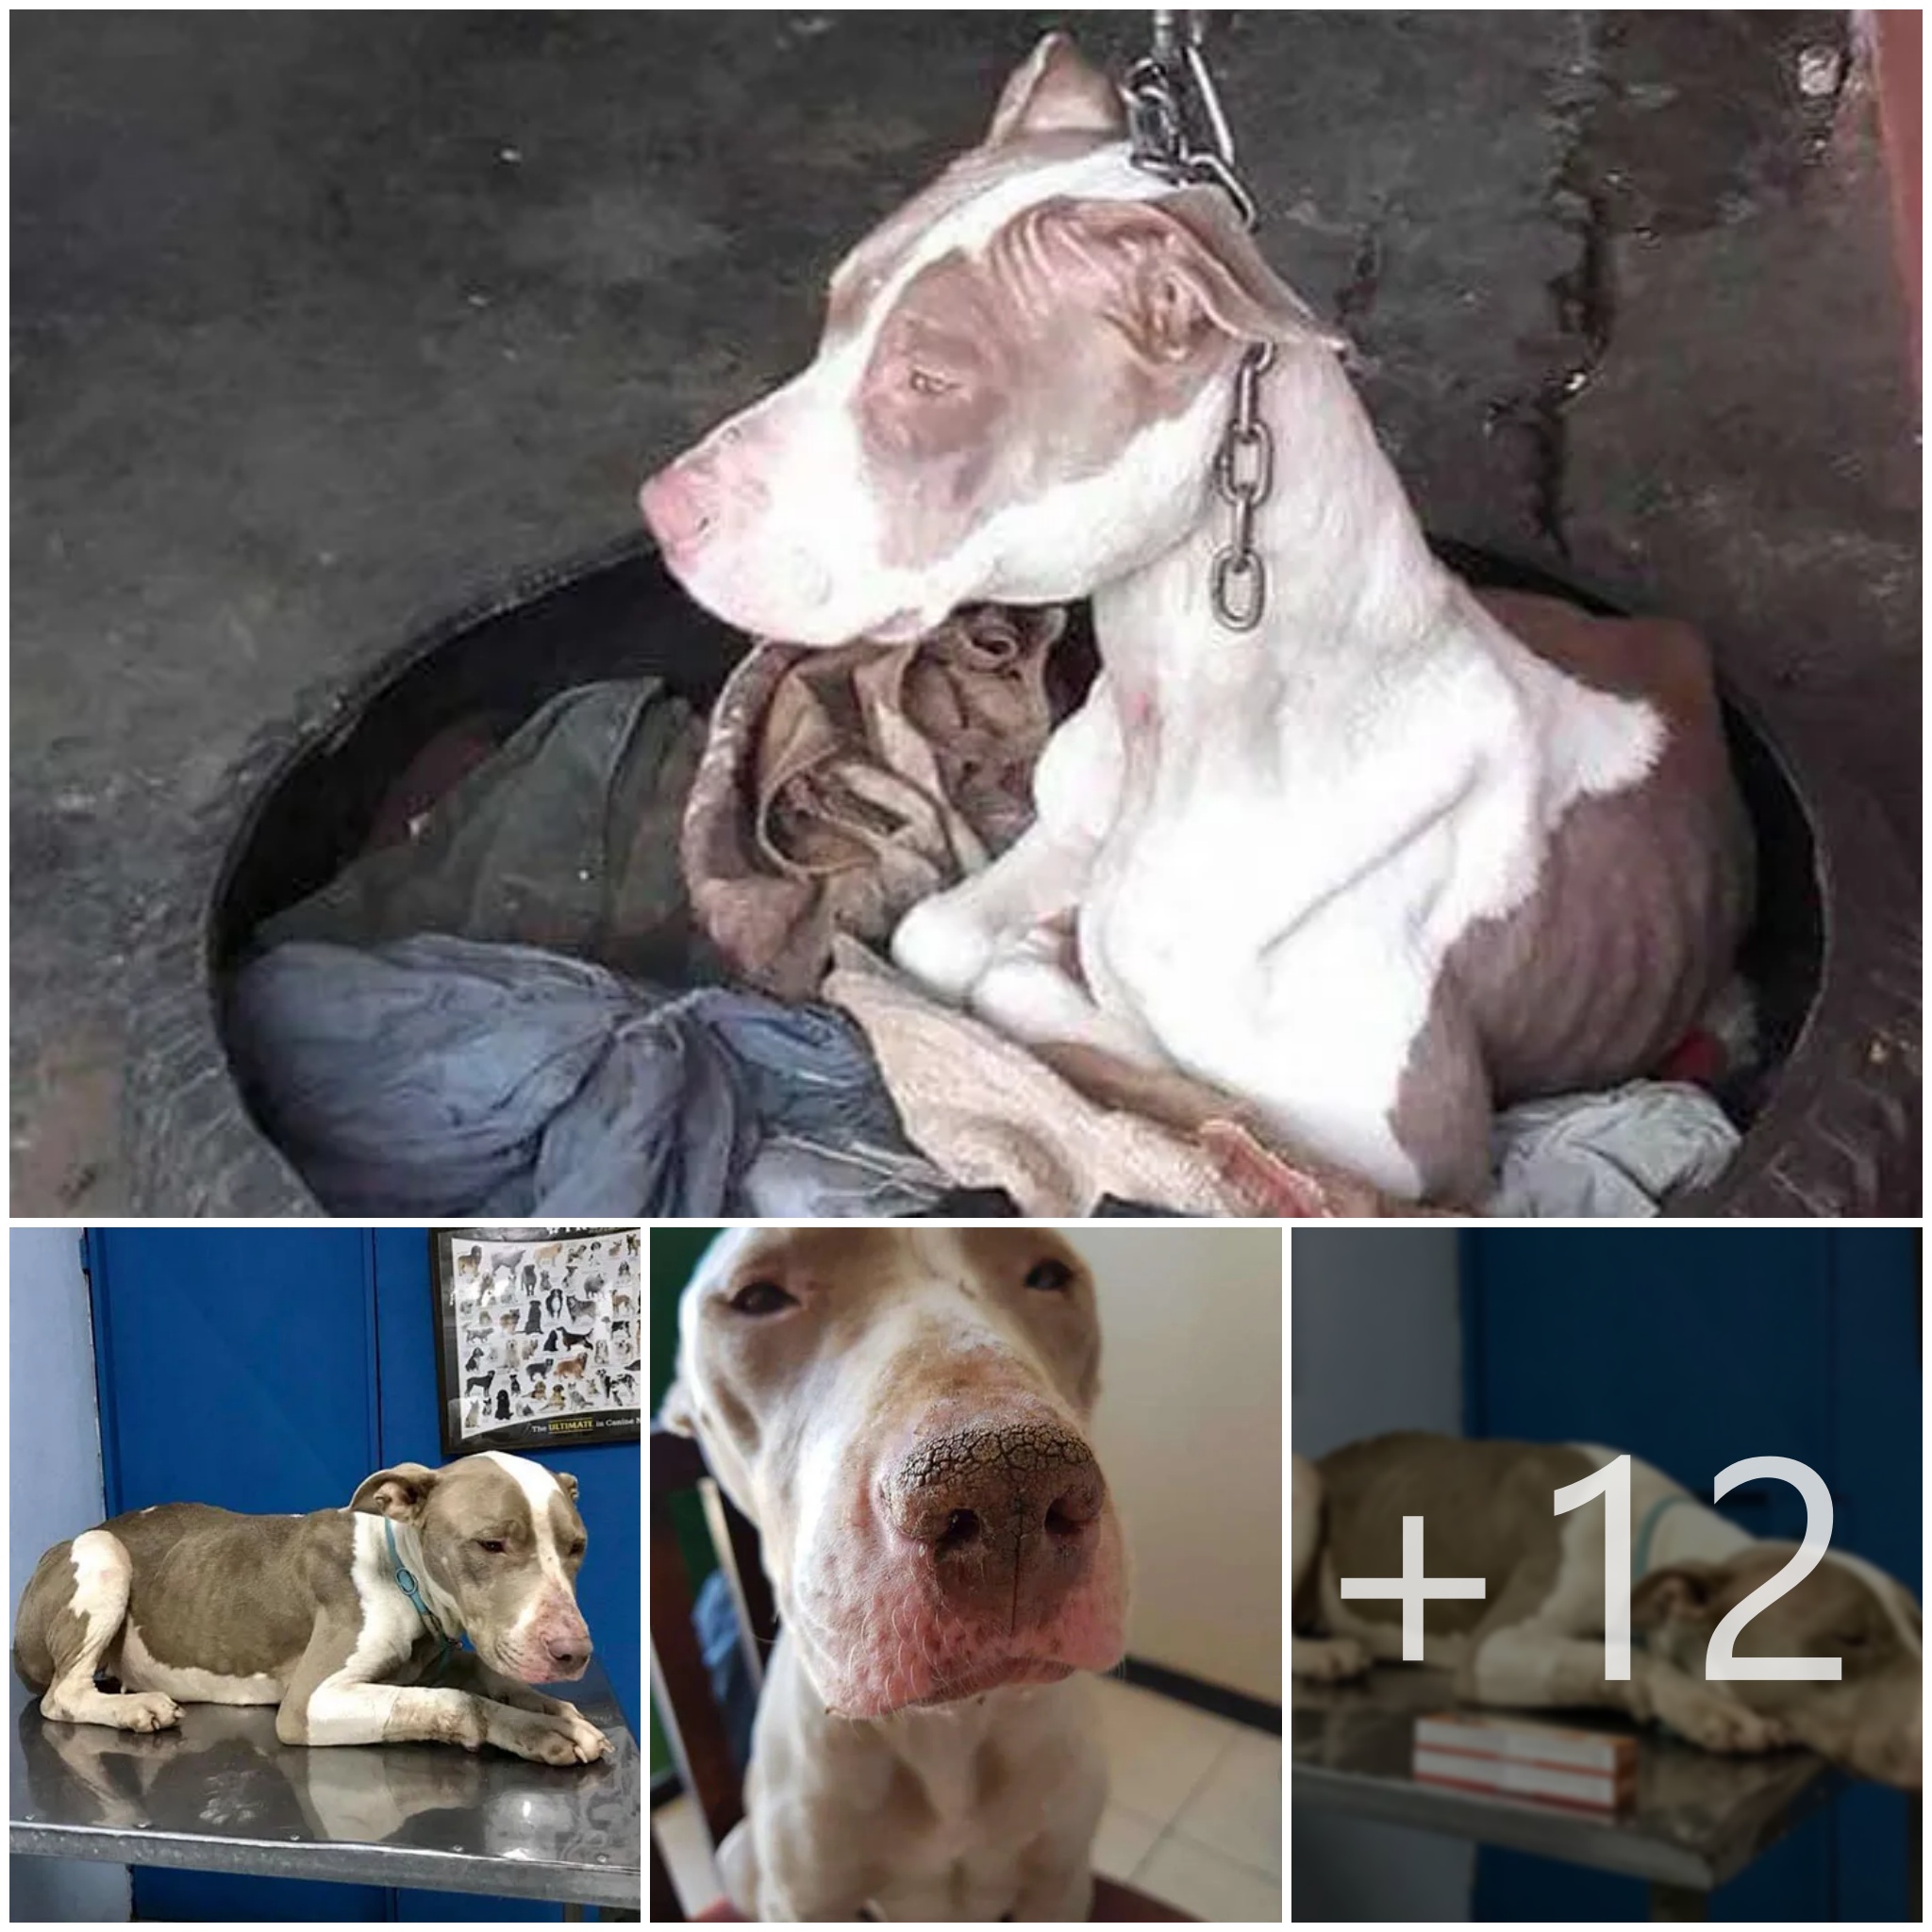 tho “Rescuers Freed a Dog Confined to an Excessively Short Chain, Unable to Even Rest Her Head. Her Astonishing Transformation Now Stands as a Testament to the Incredible Difference Compassion and Care Can Make.” tho